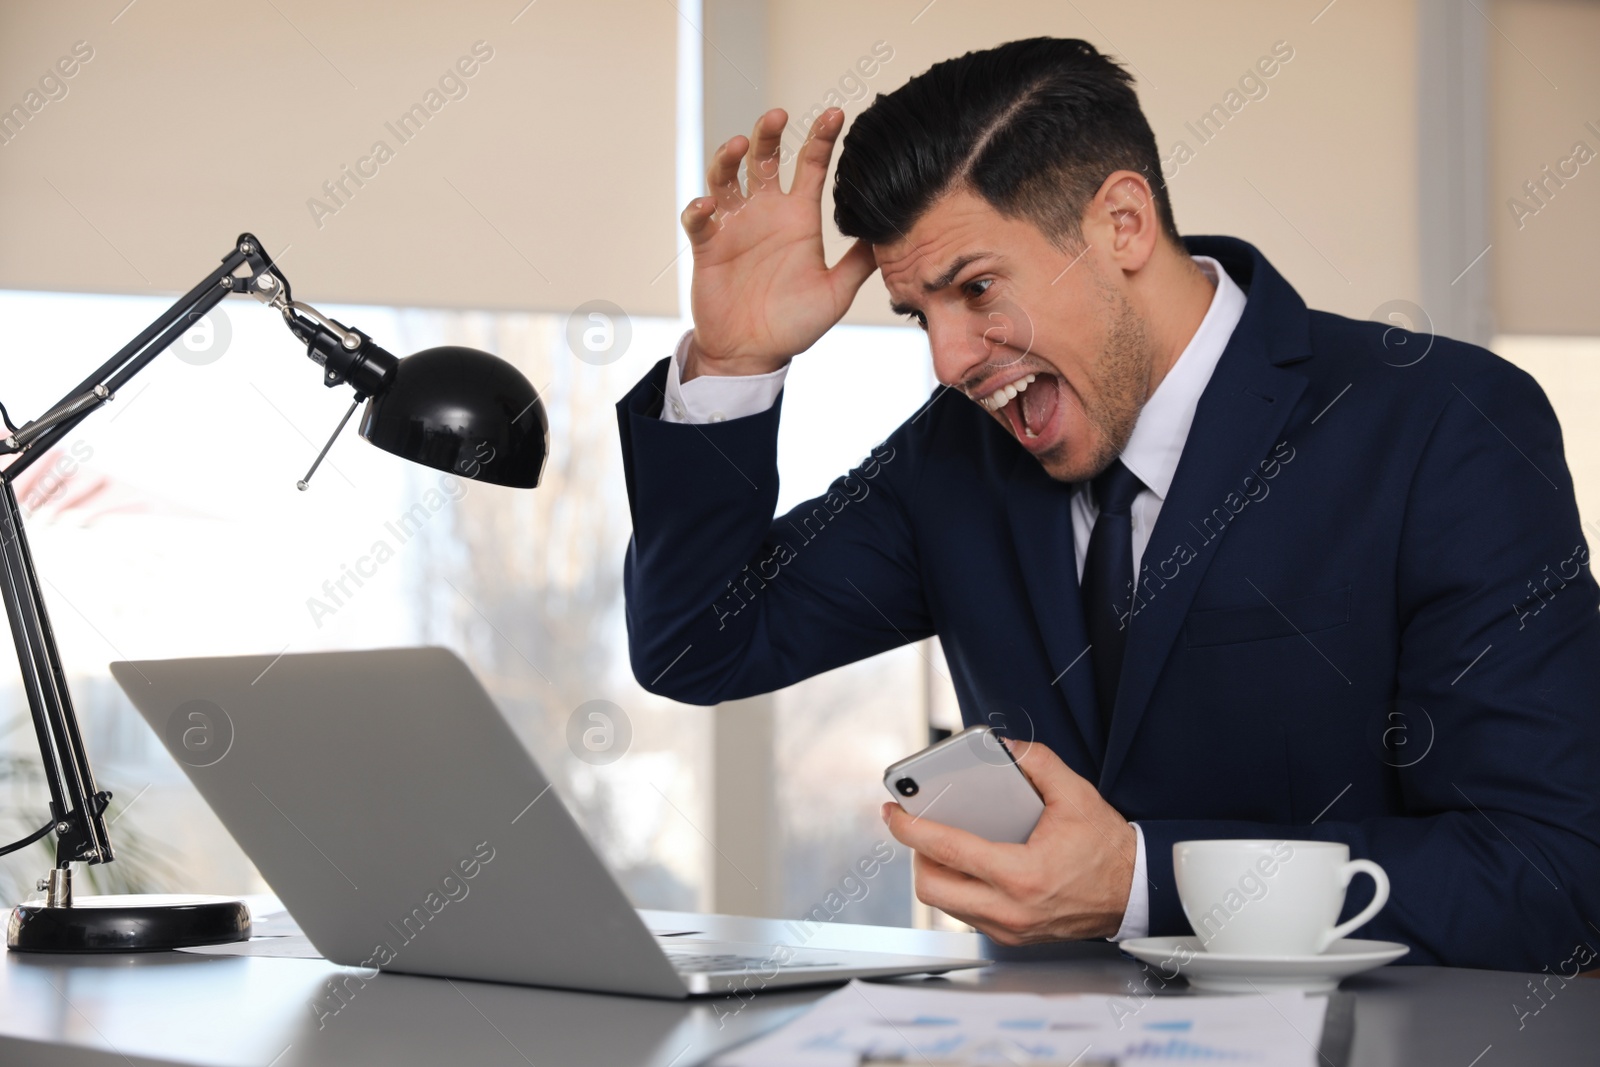 Photo of Emotional businessman with laptop and smartphone at table in office